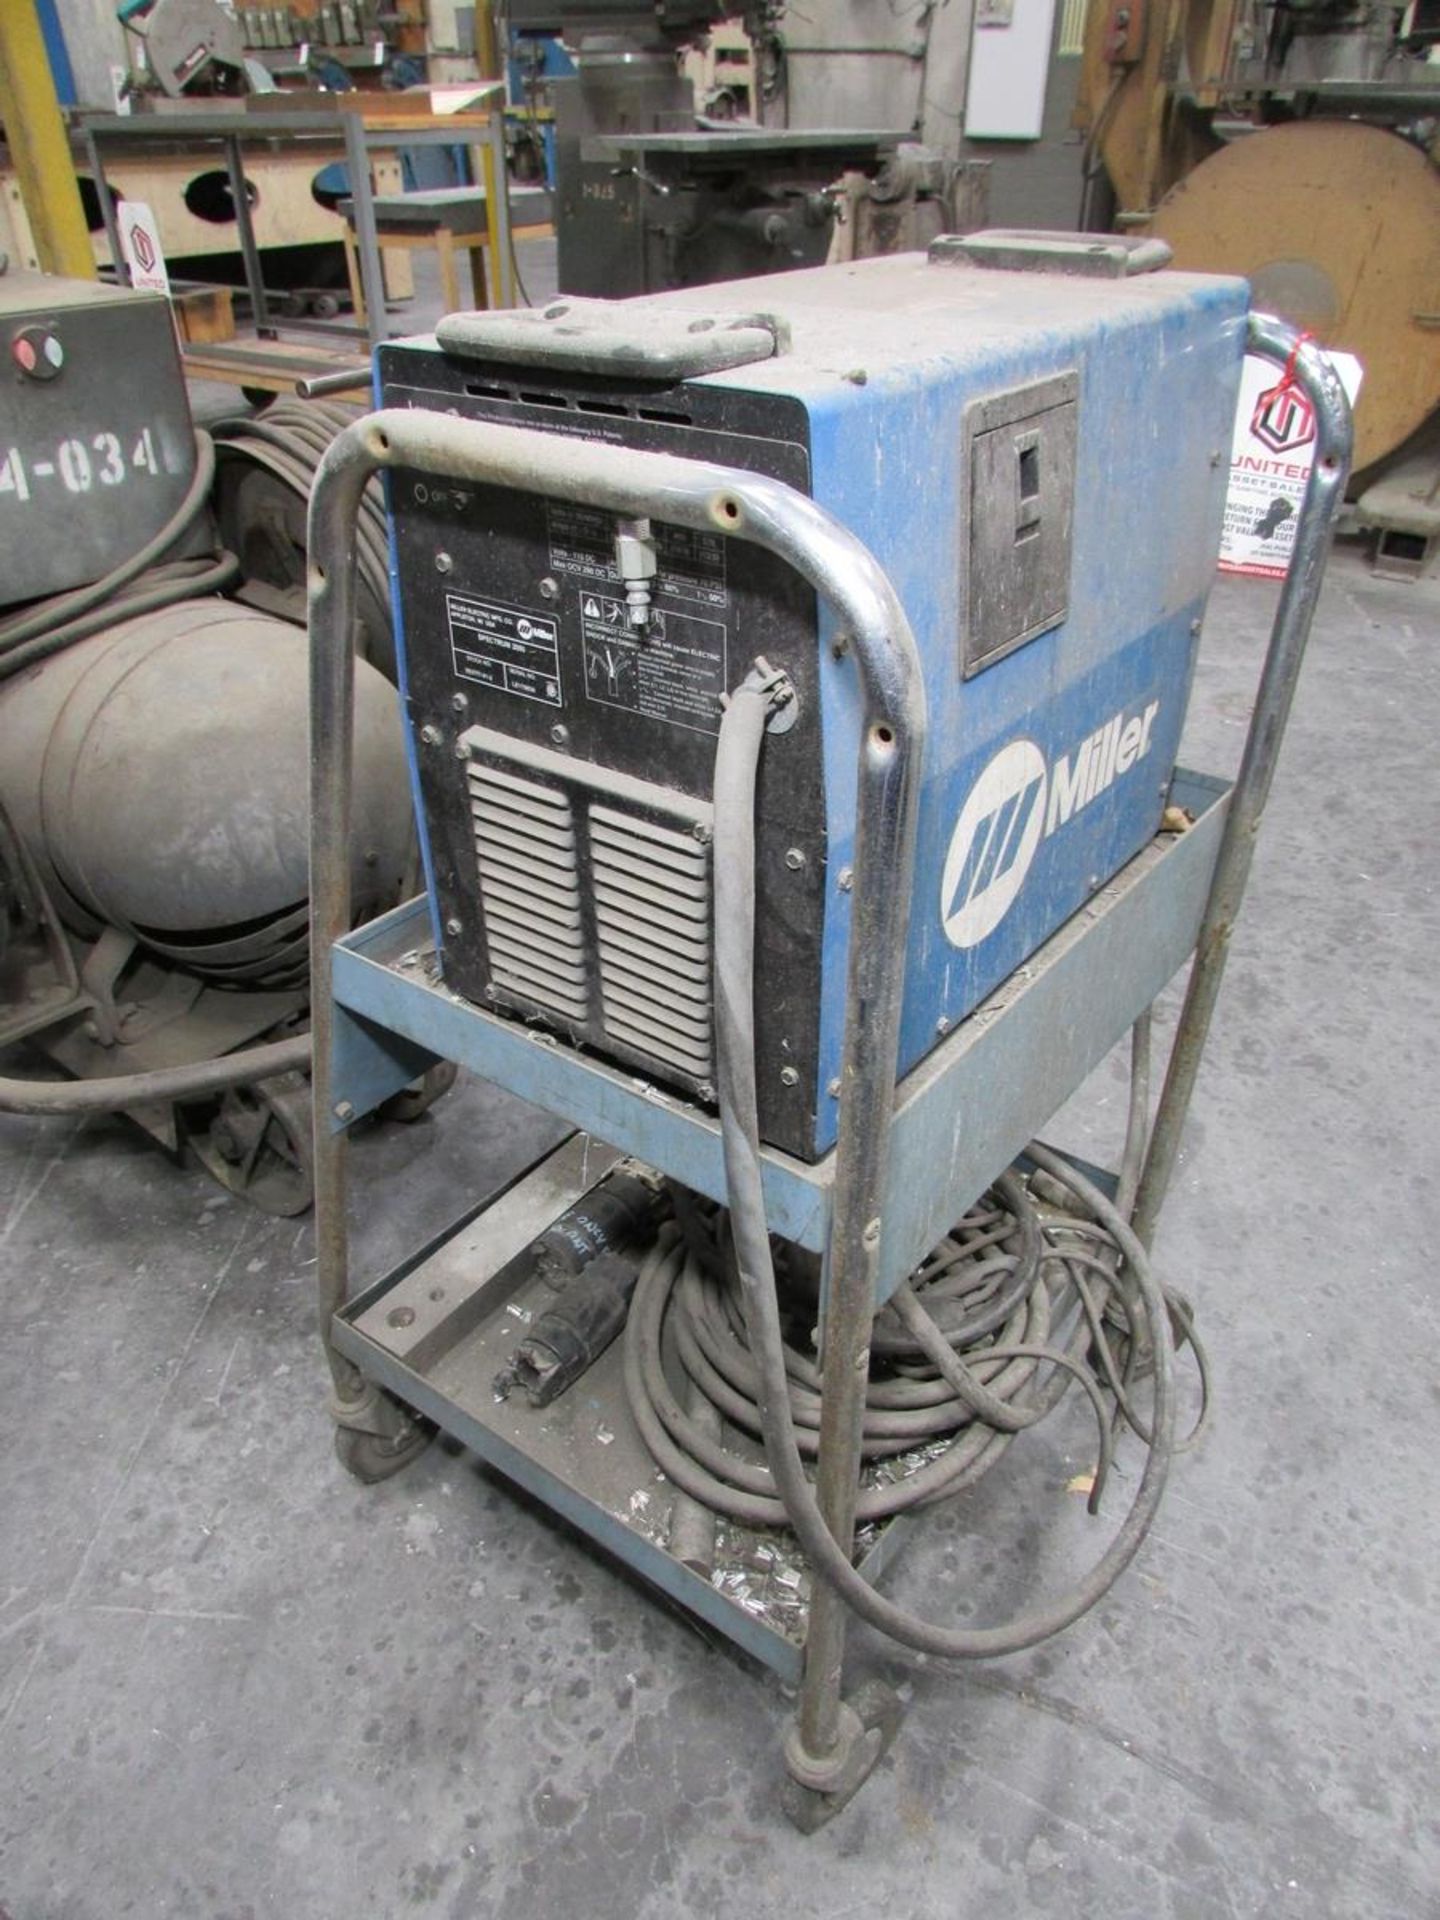 MILLER SPECTRUM 2050 DC PLASMA CUTTING SYSTEM W/ AUTO-LINE, 110V 55A 60% DUTY CYCLE 280 MAX OCV DC - Image 5 of 8